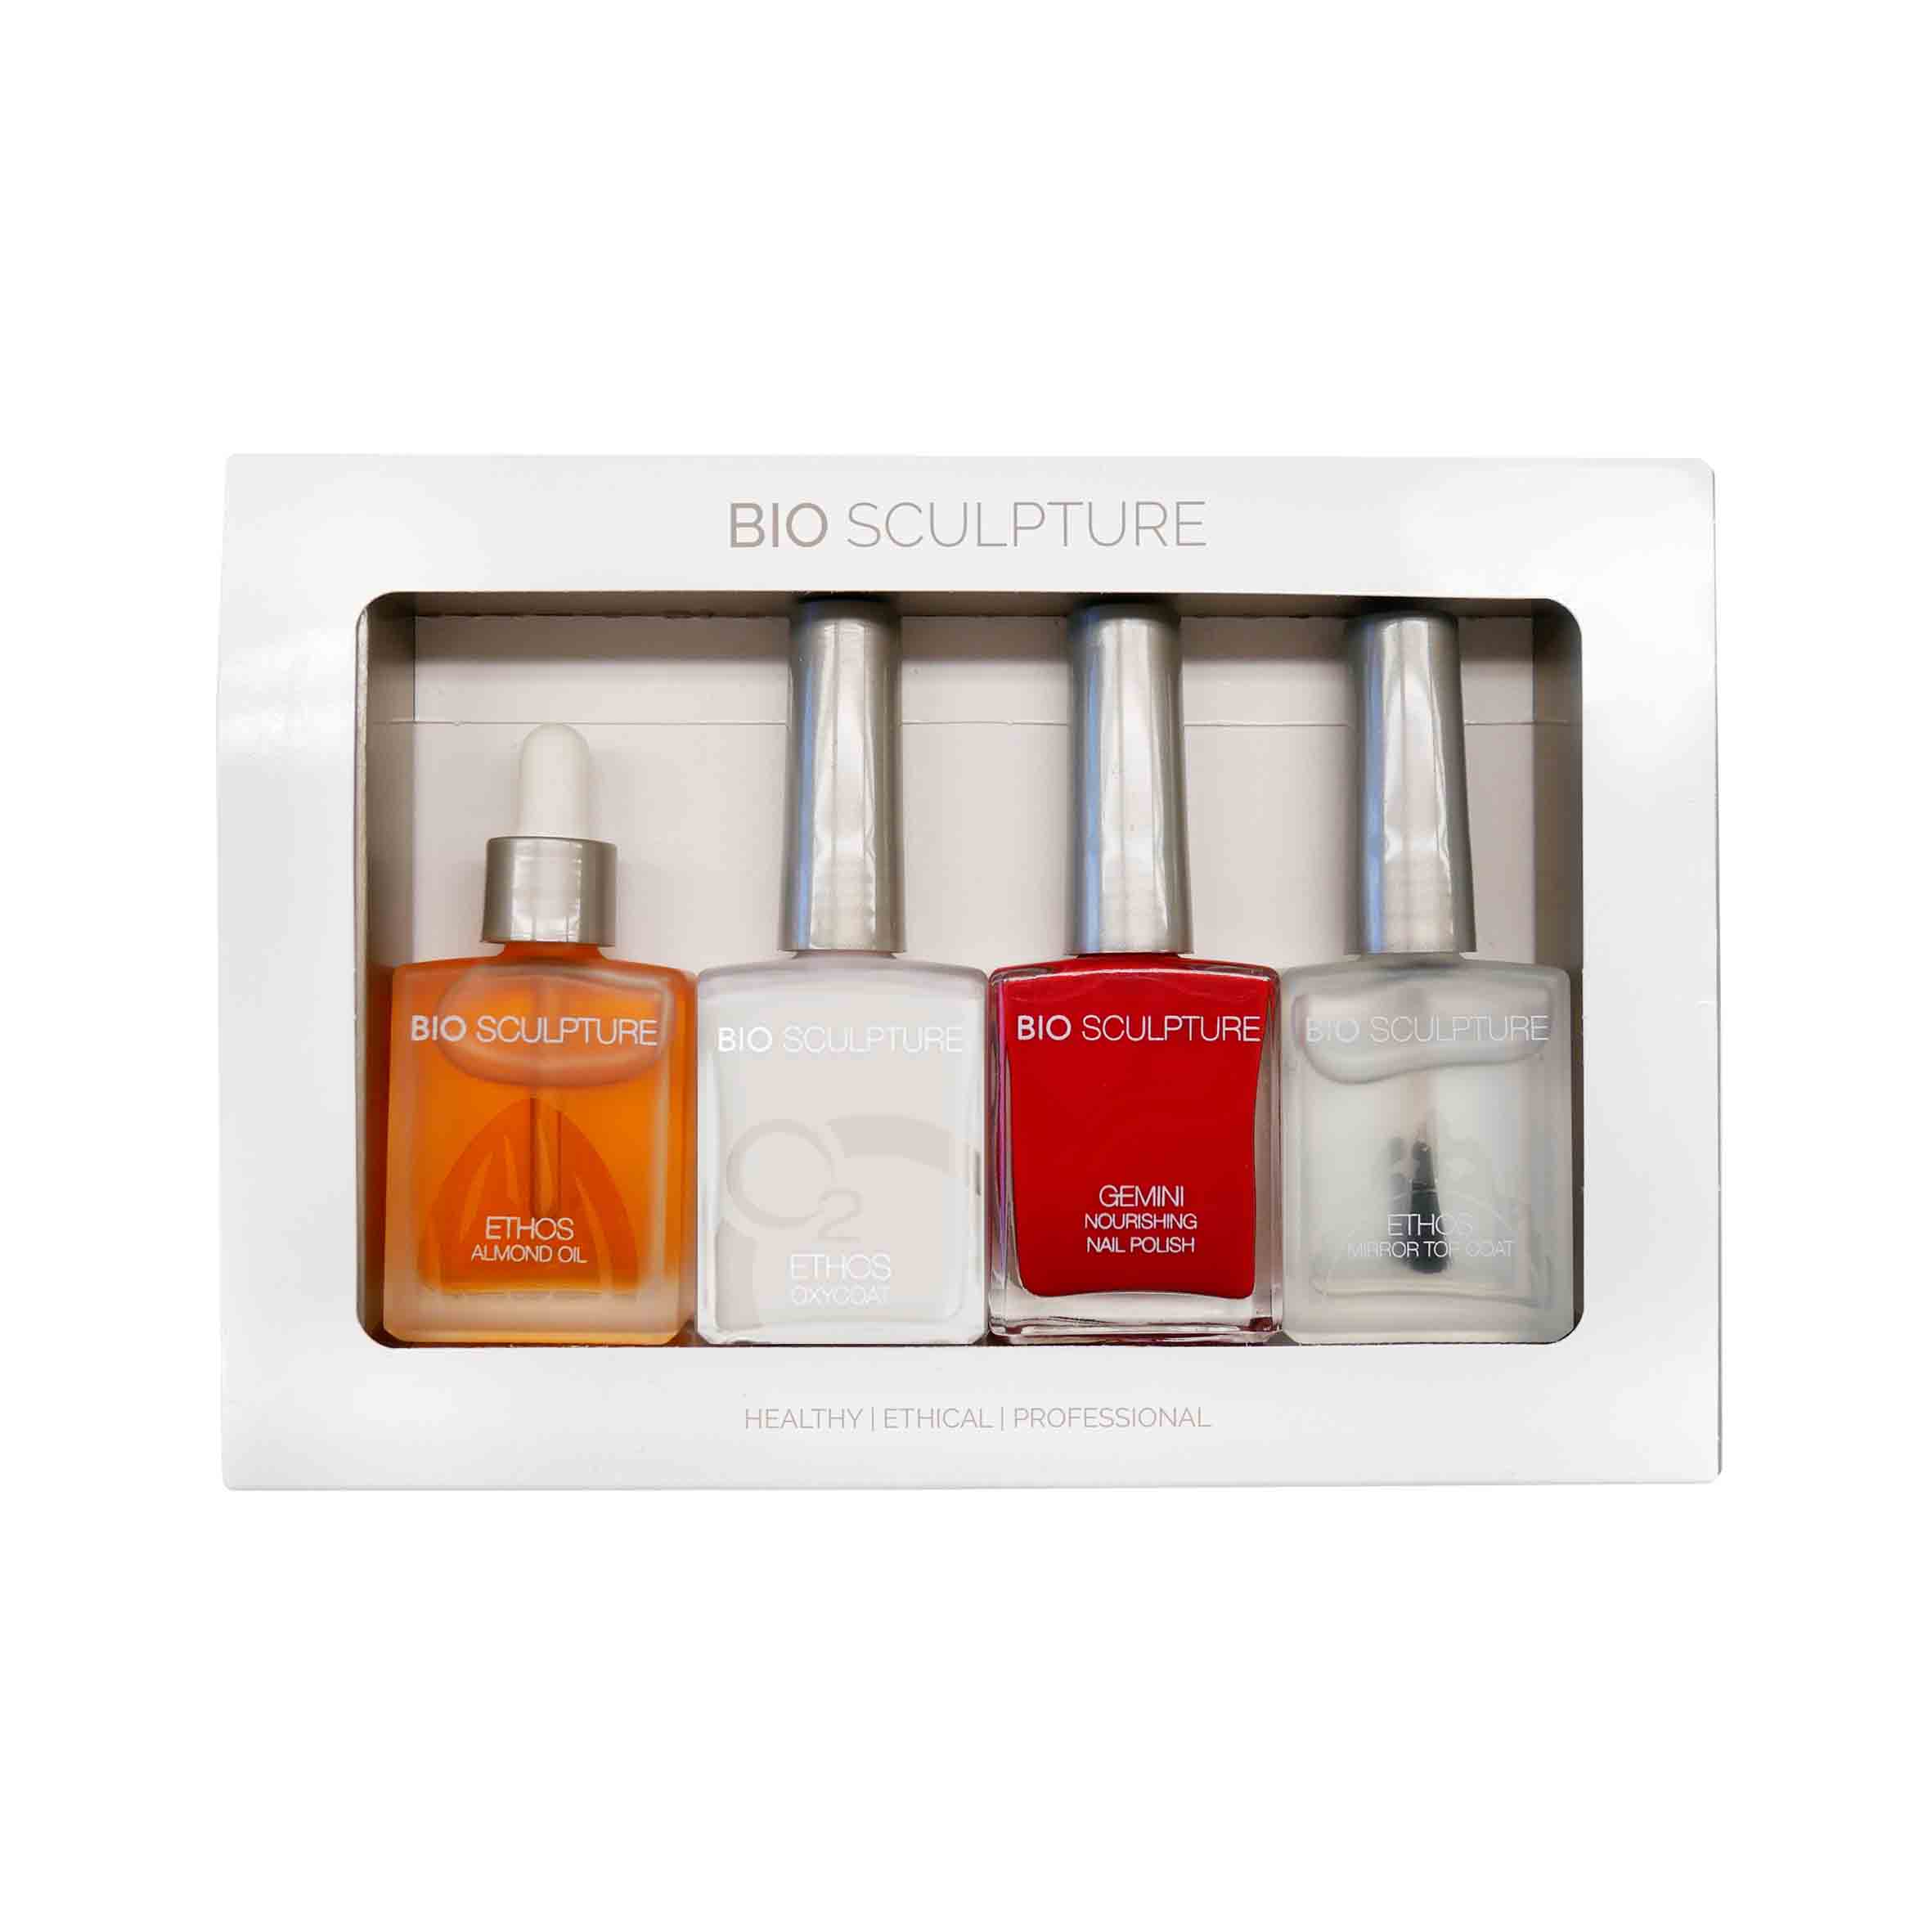 Bio Sculpture Gift Box featuring 4 14ml bottles. The bottles can be picked to create your own personal set of ethos nail treatments and can include a gemini nail polish